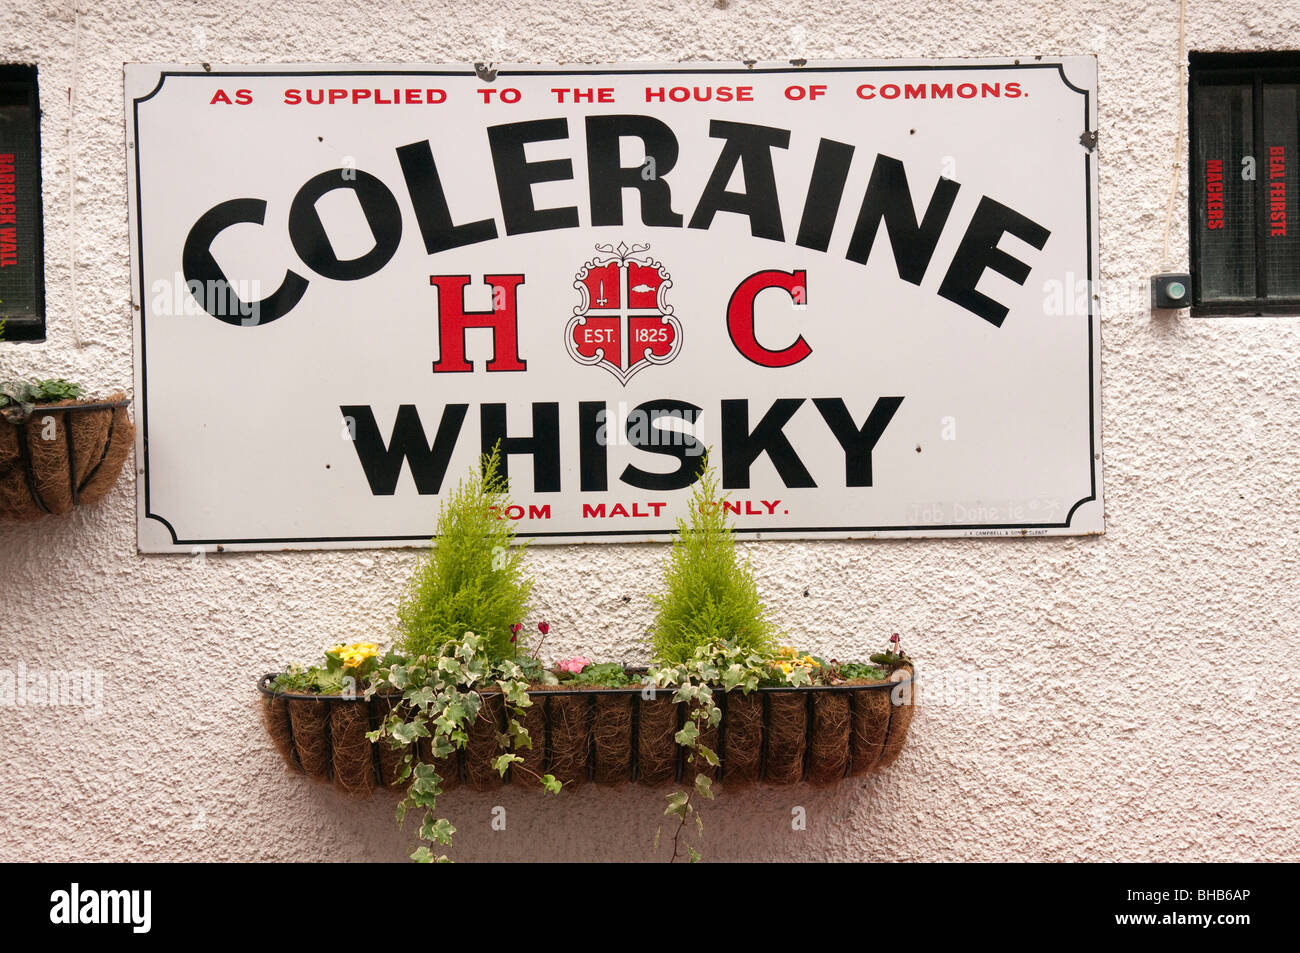 Sign advertising 'Coleraine Whisky' on the wall of the Duke of York pub, Belfast. Stock Photo